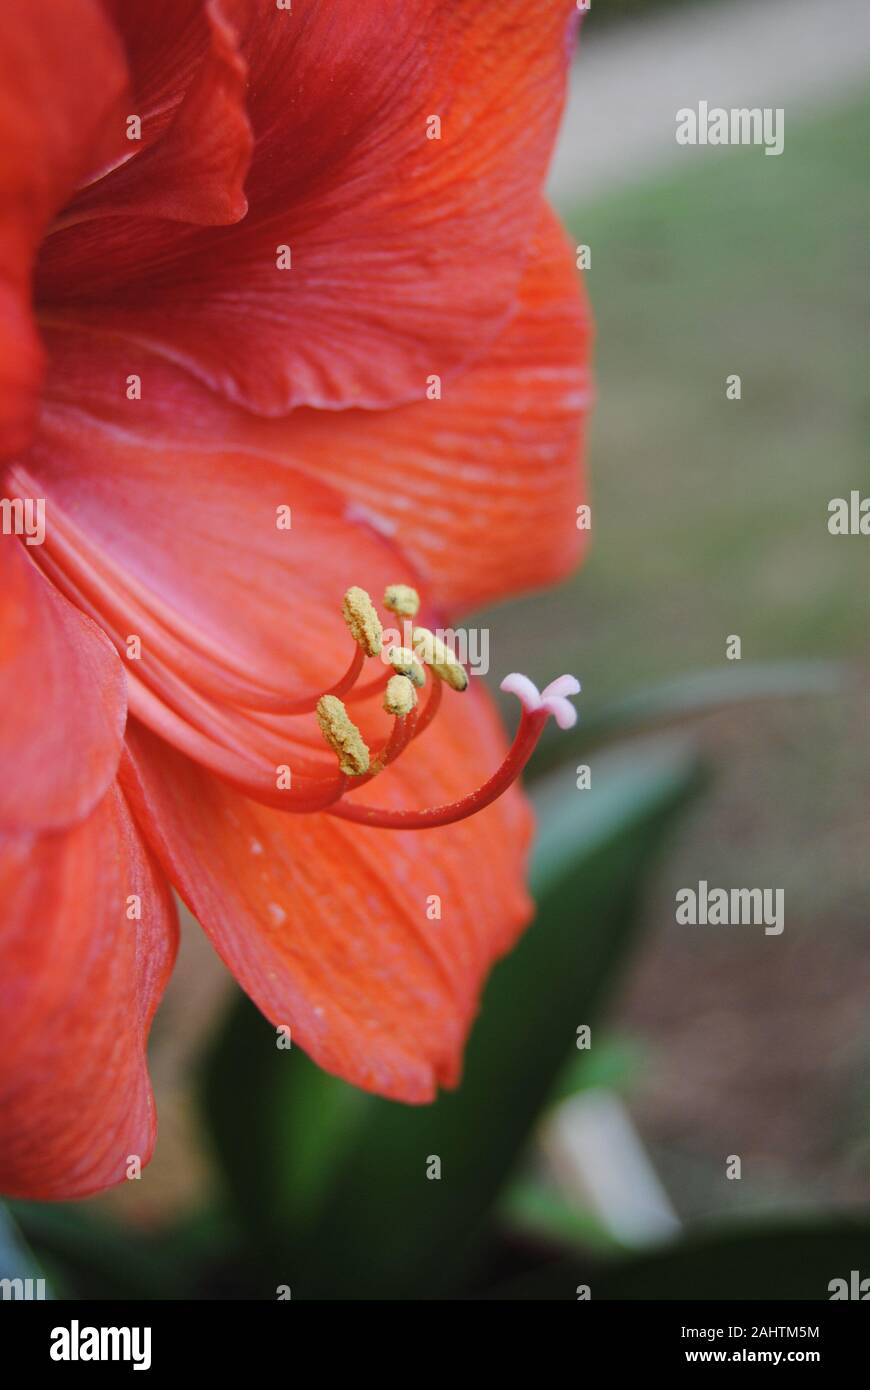 Closeup Of A Bright Red Amaryllis With Faded Background Stock Photo